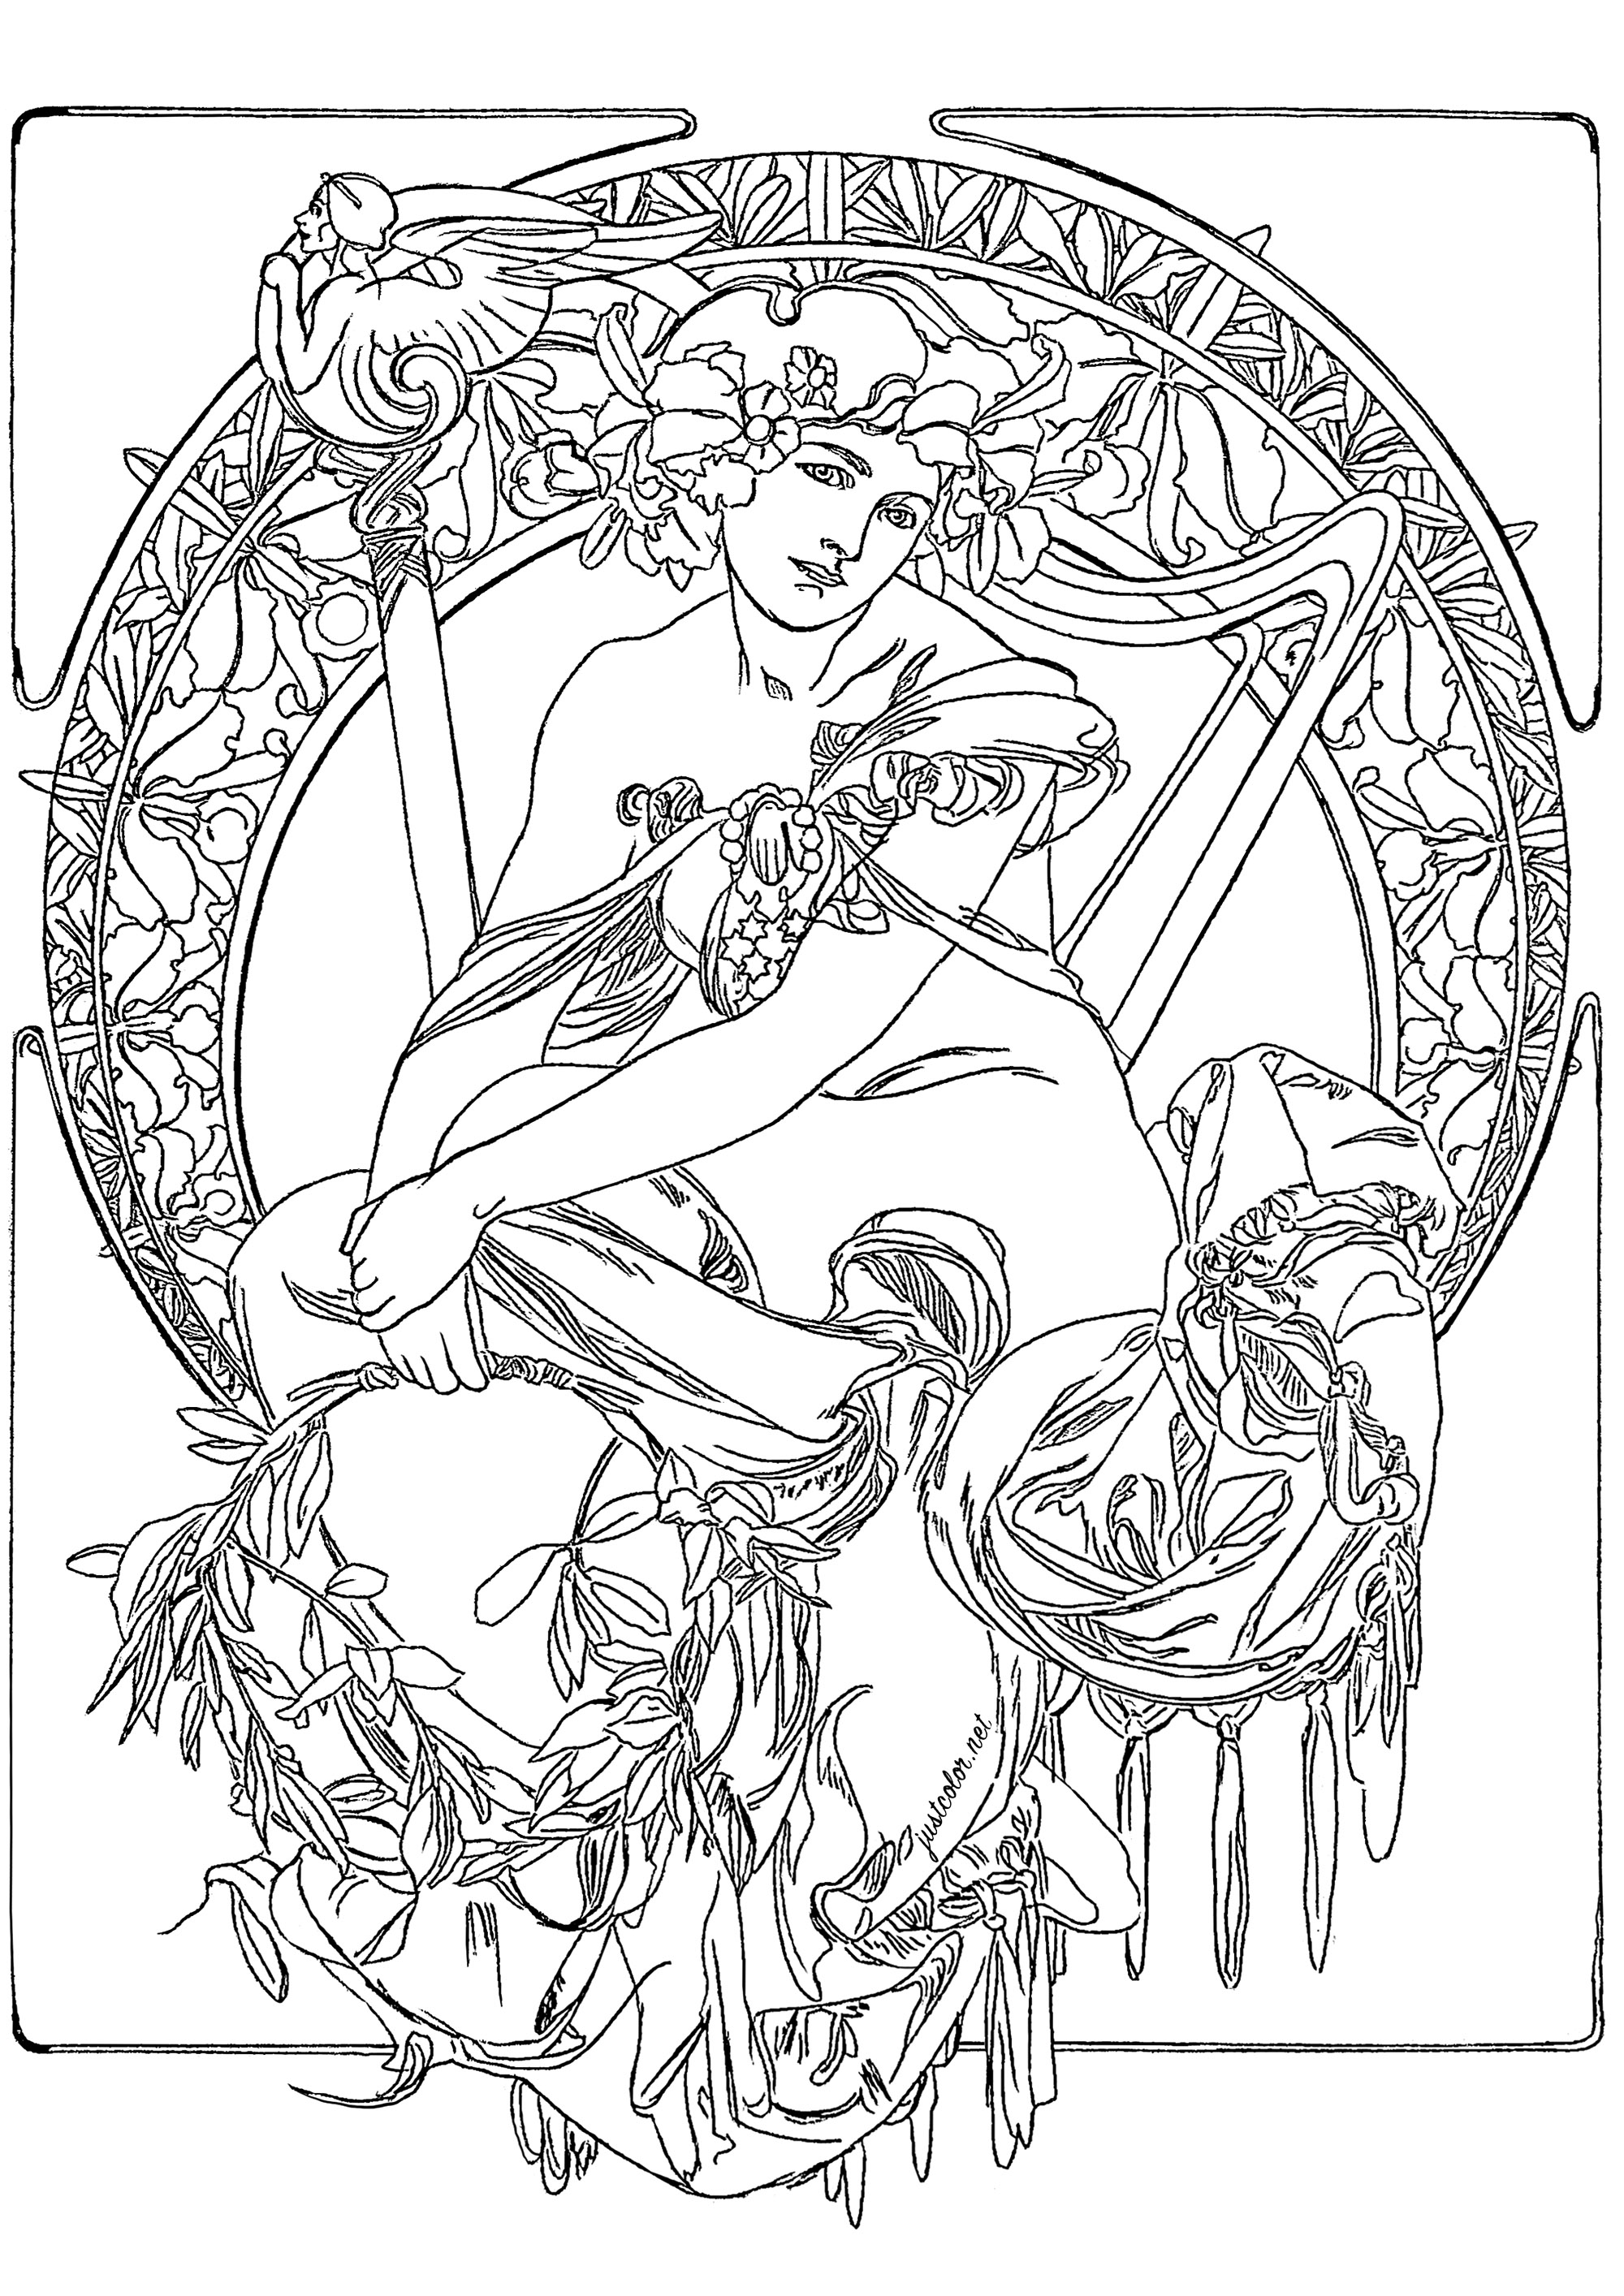 Alfons Mucha - Study for an advertising poster (1900). The composition is based on a central circle, surrounded by a series of floral and geometric motifs. The central circle features a female figure, whose clothes are adorned with floral motifs and a wreath of leaves and flowers. Although this is a sketch, the details are very precise, reflecting Mucha's finesse and attention to detail (the original drawing has been slightly reworked to allow coloring), Artist : Olivier